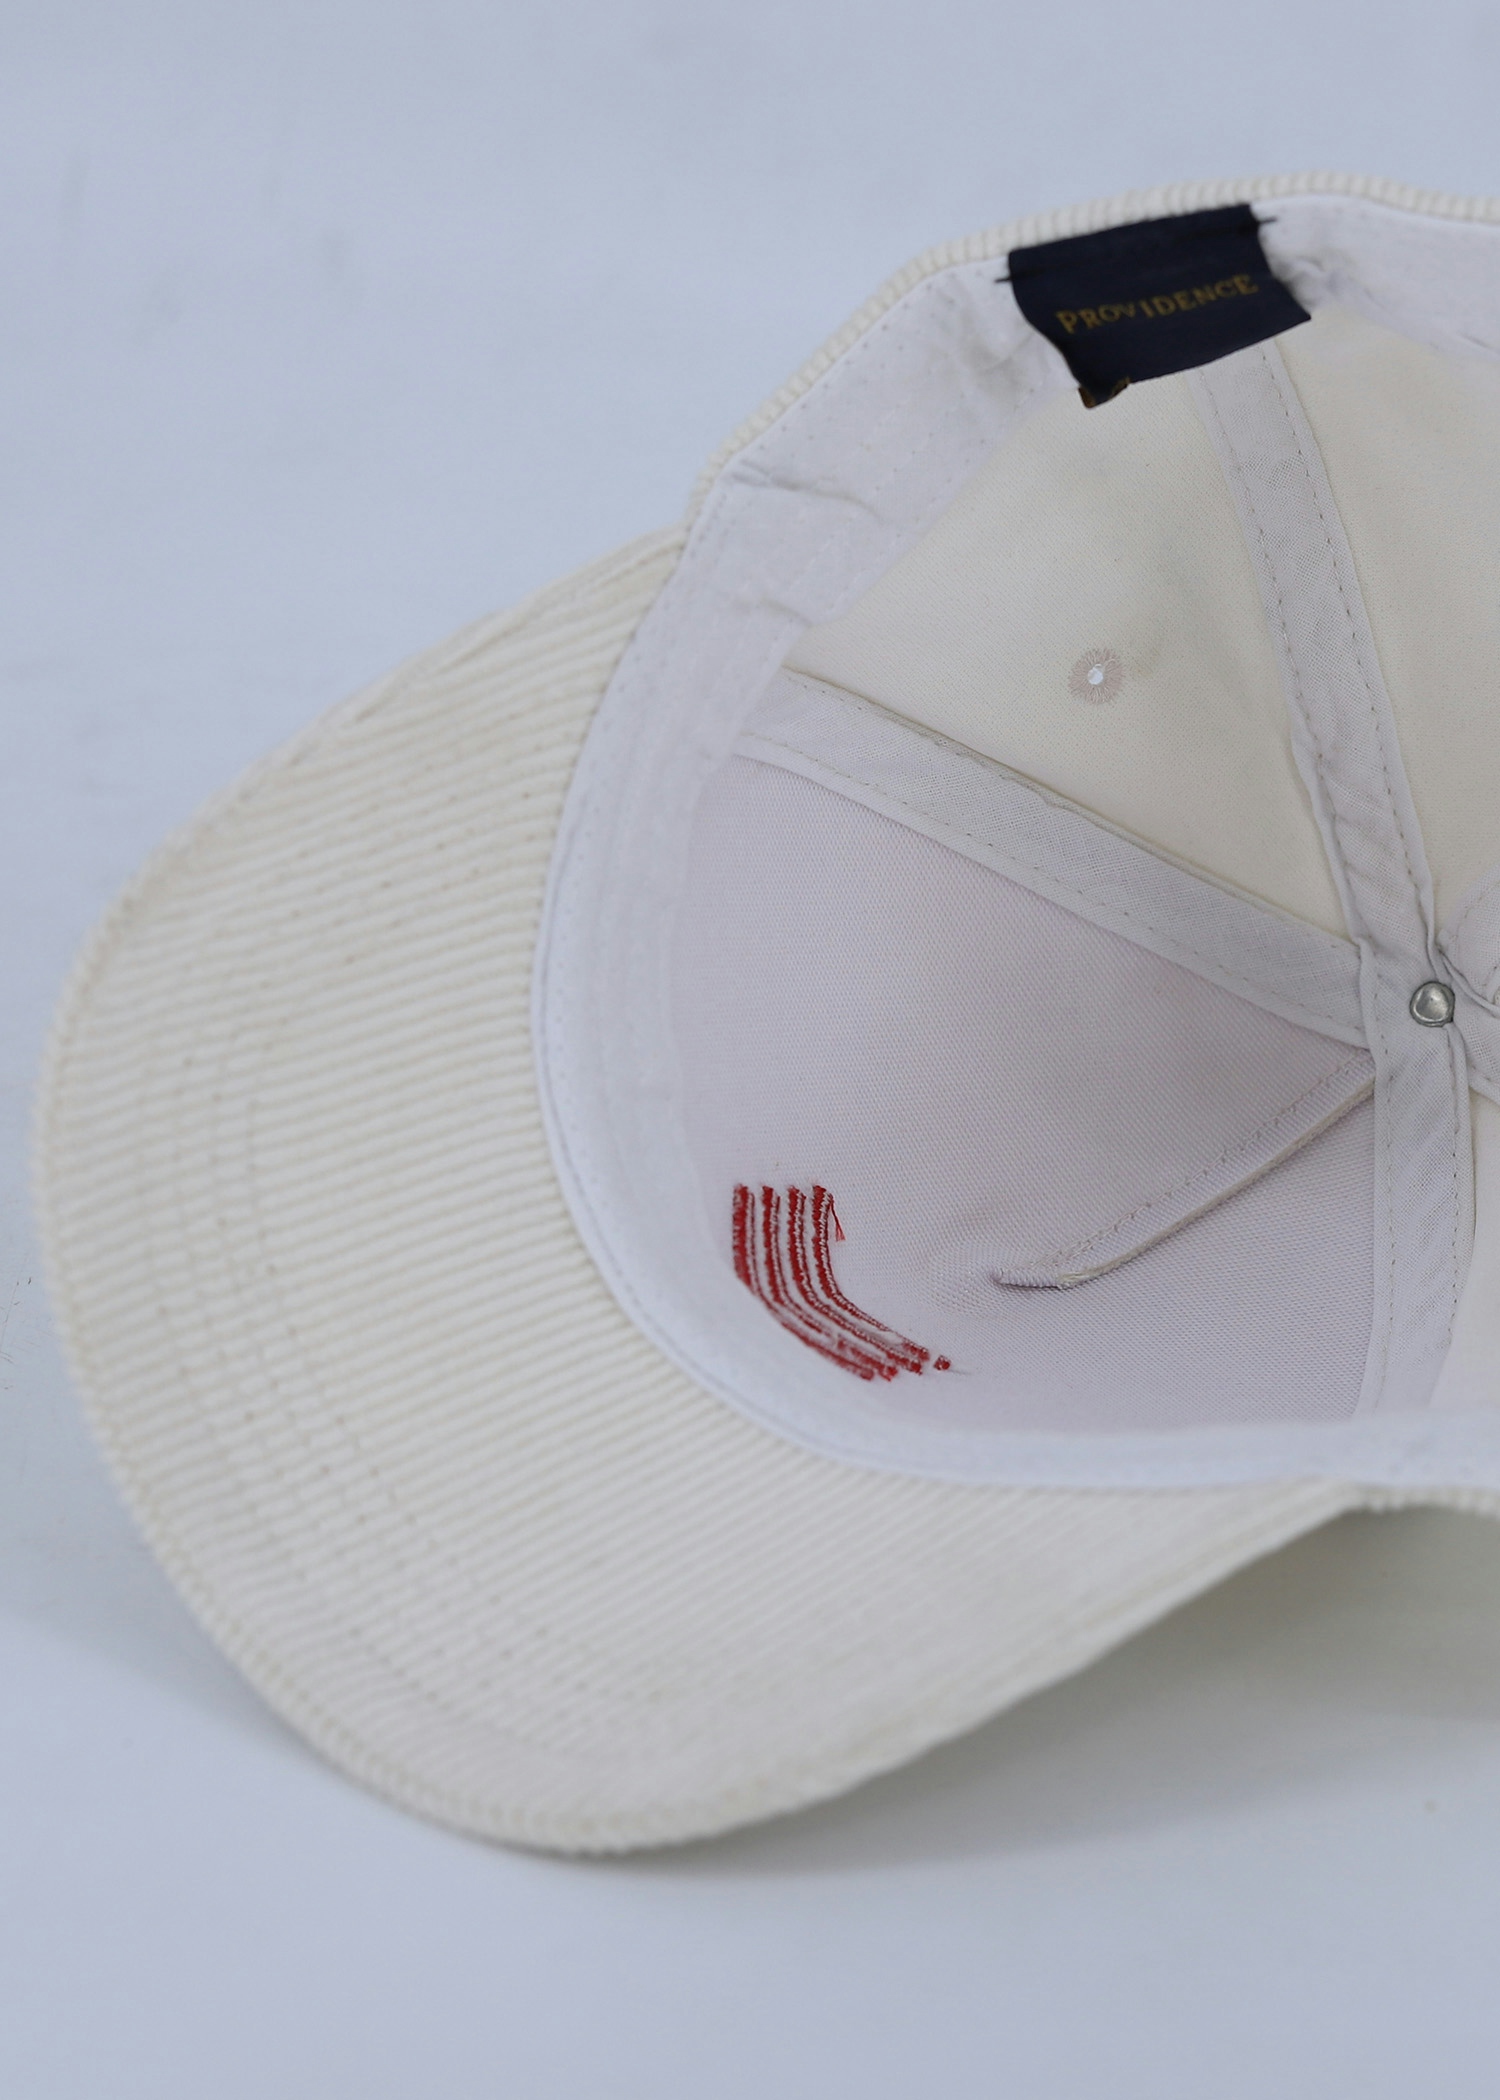 rooster cord cap white color inside view